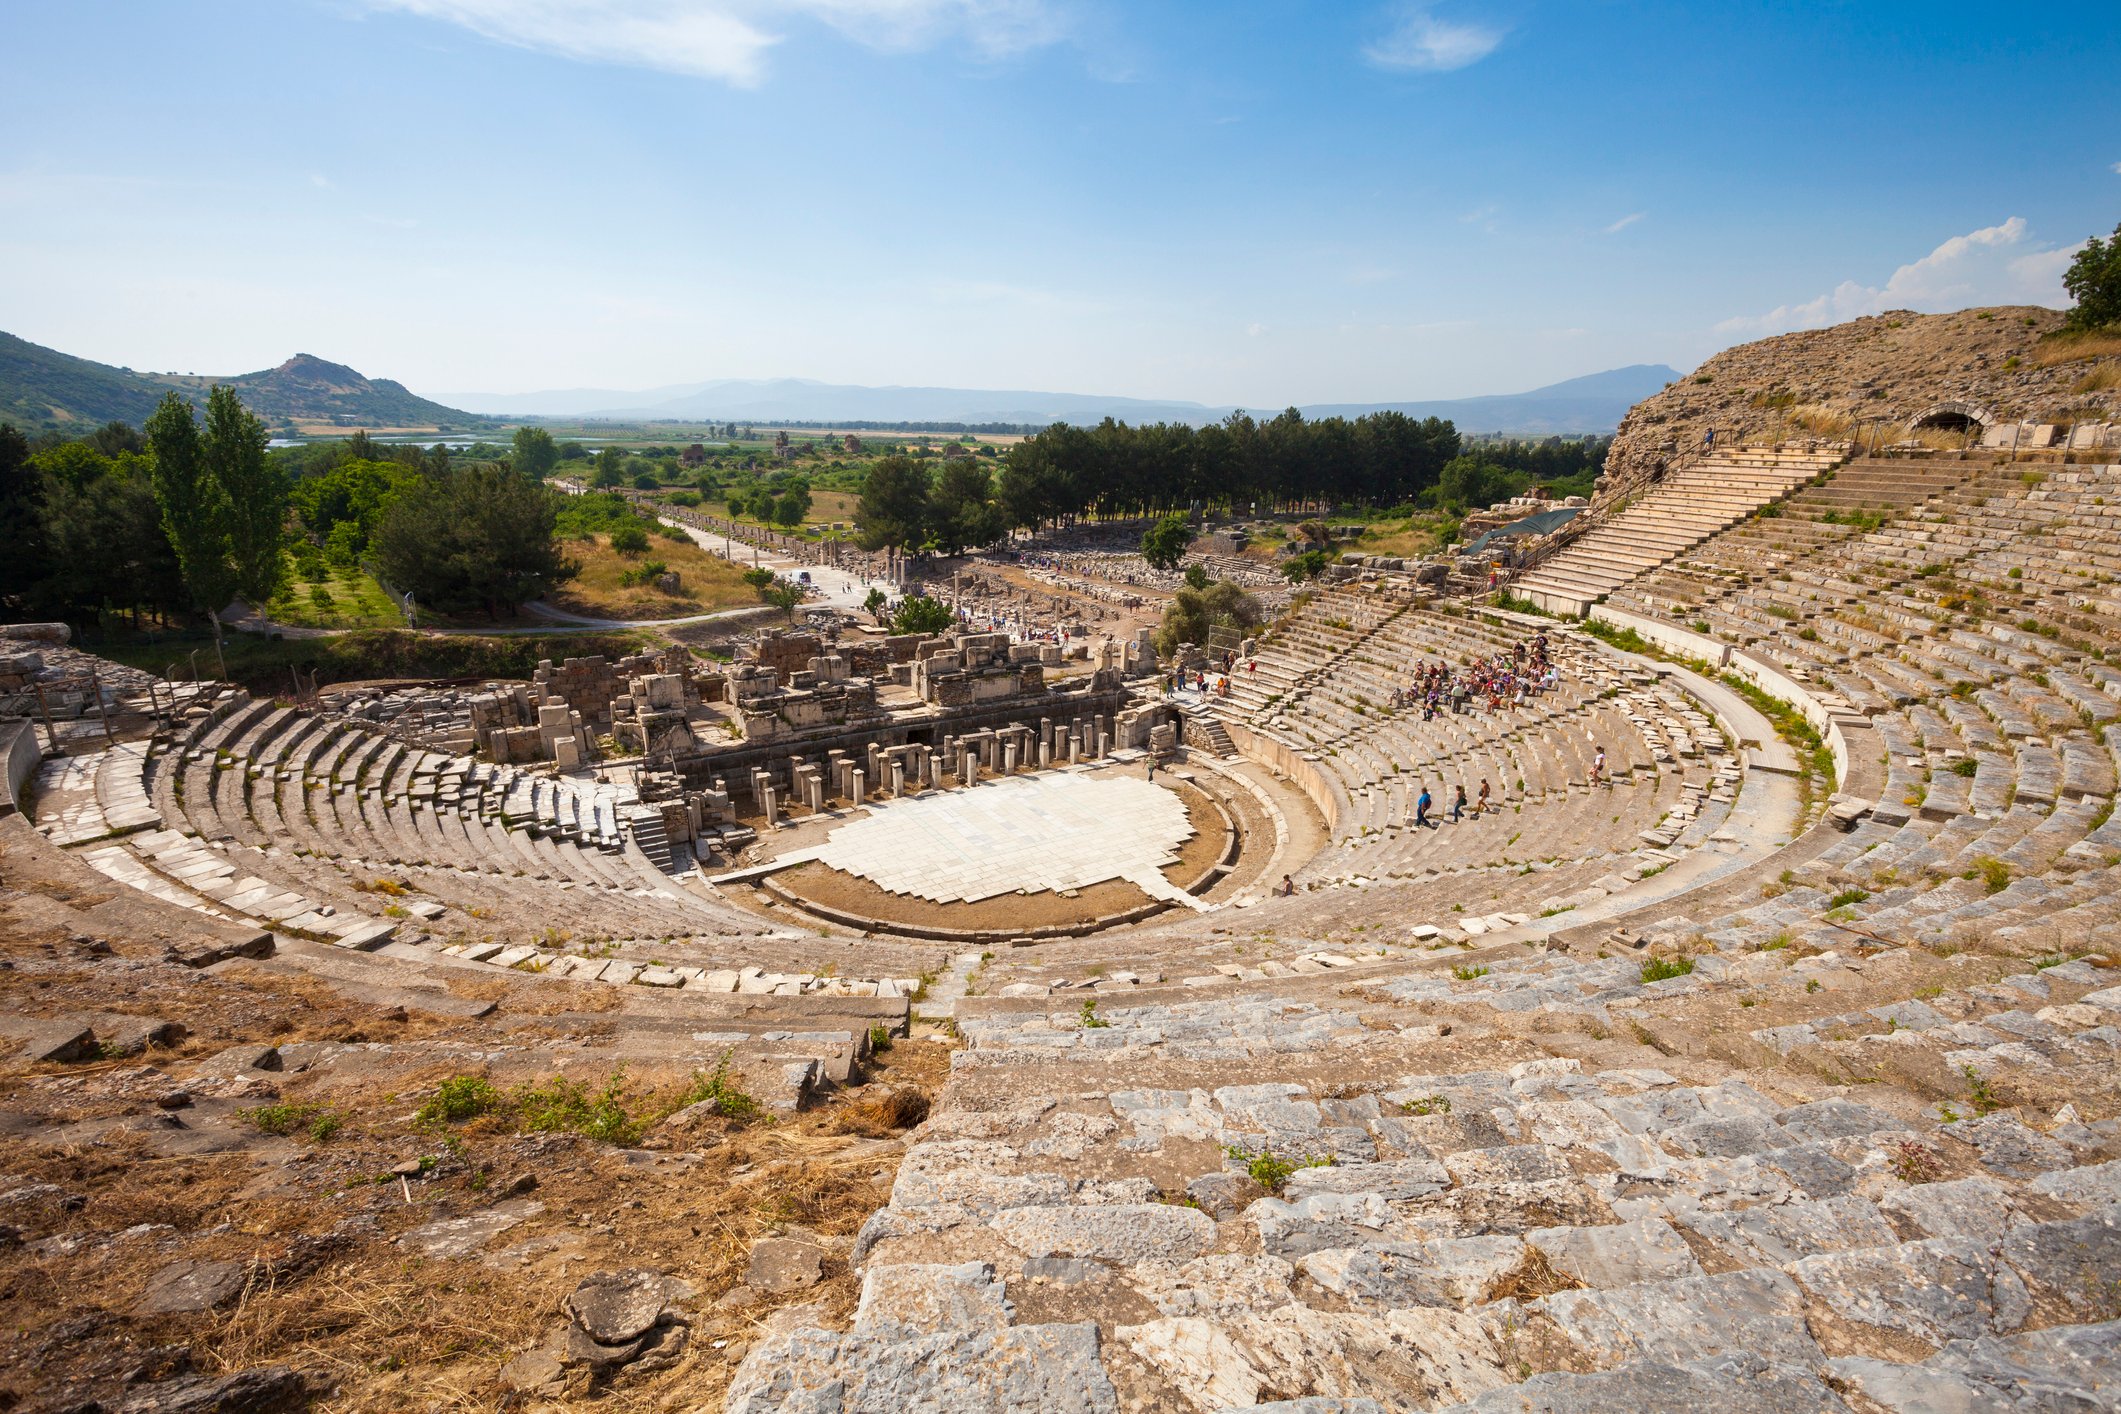 Photo dated May 24, 2011 shows the wiew of an amphitheatre at the ancient ruins of Ephesus. (iStock Photo)
